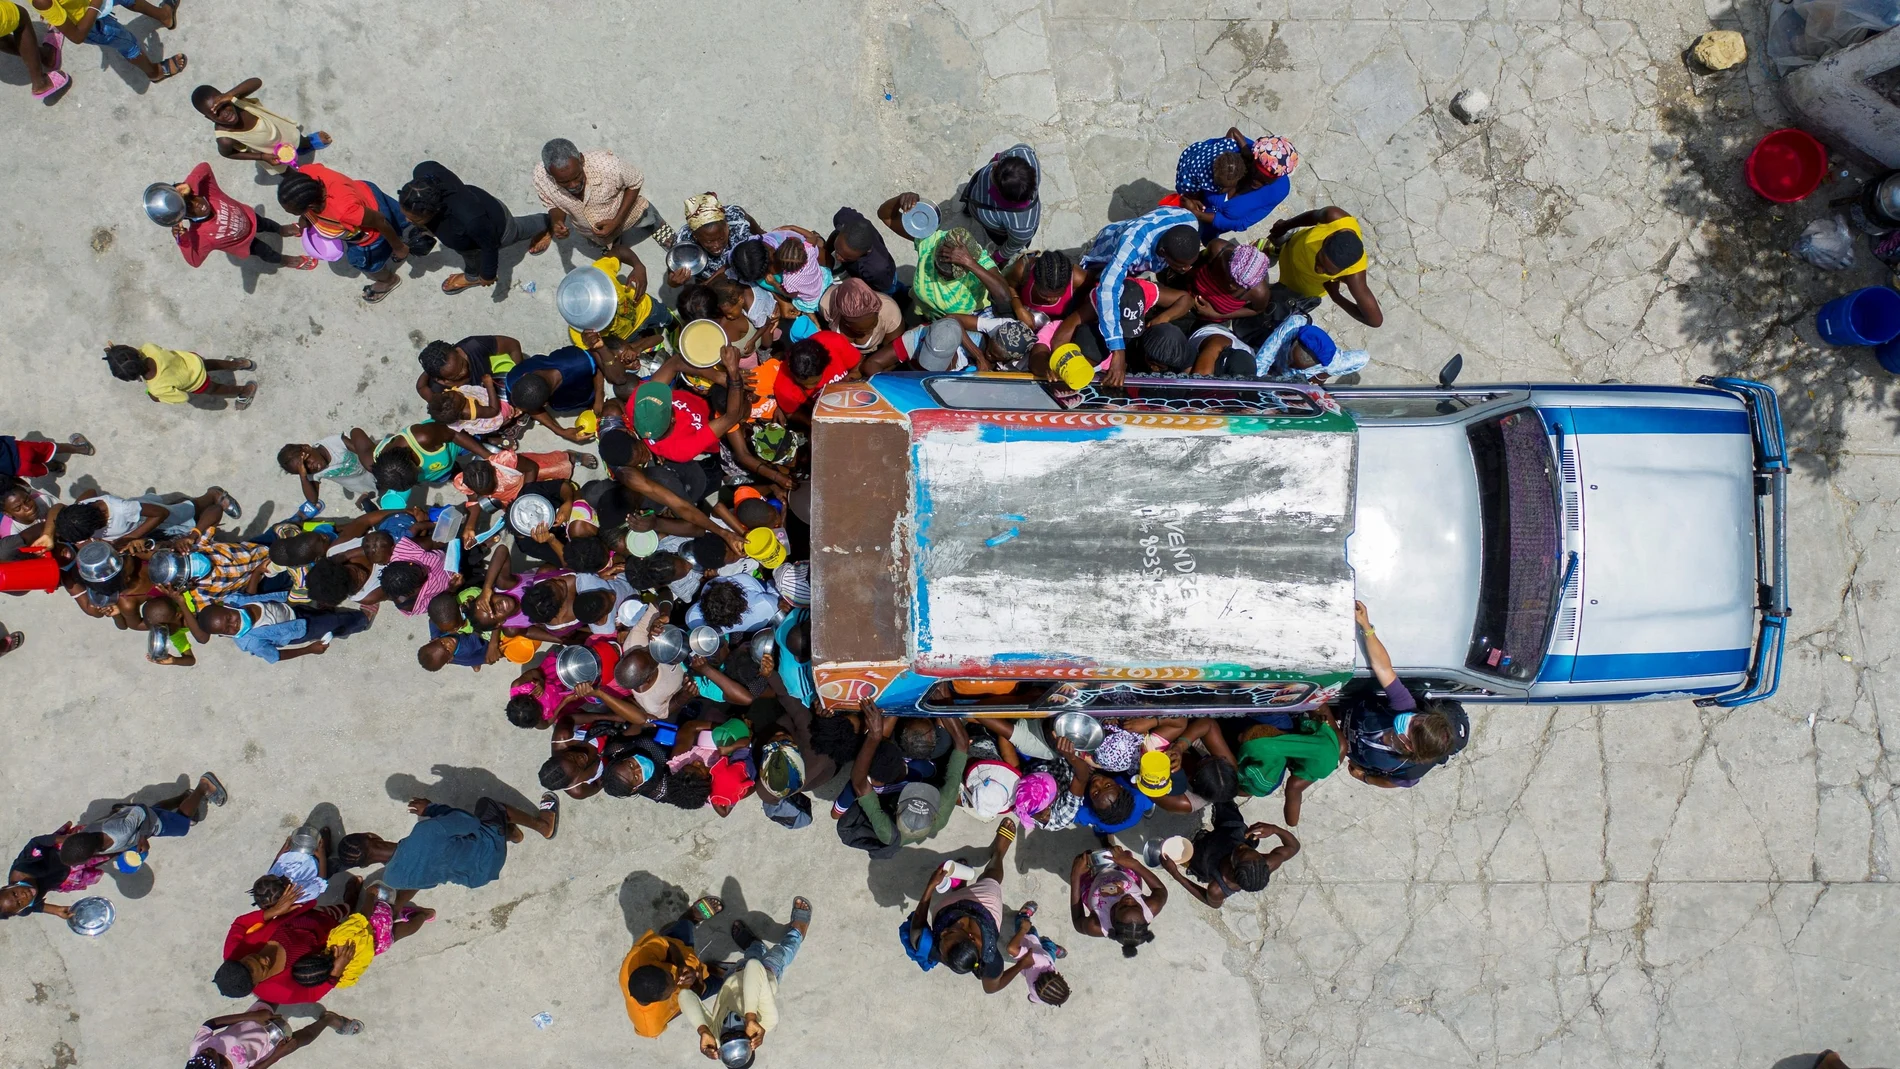 People gather around a car where volunteers distribute food to refugees at a shelter for families displaced by gang violence at the Saint Yves Church in Port-au-Prince, Haiti July 26, 2021. REUTERS/Ricardo Arduengo TPX IMAGES OF THE DAY